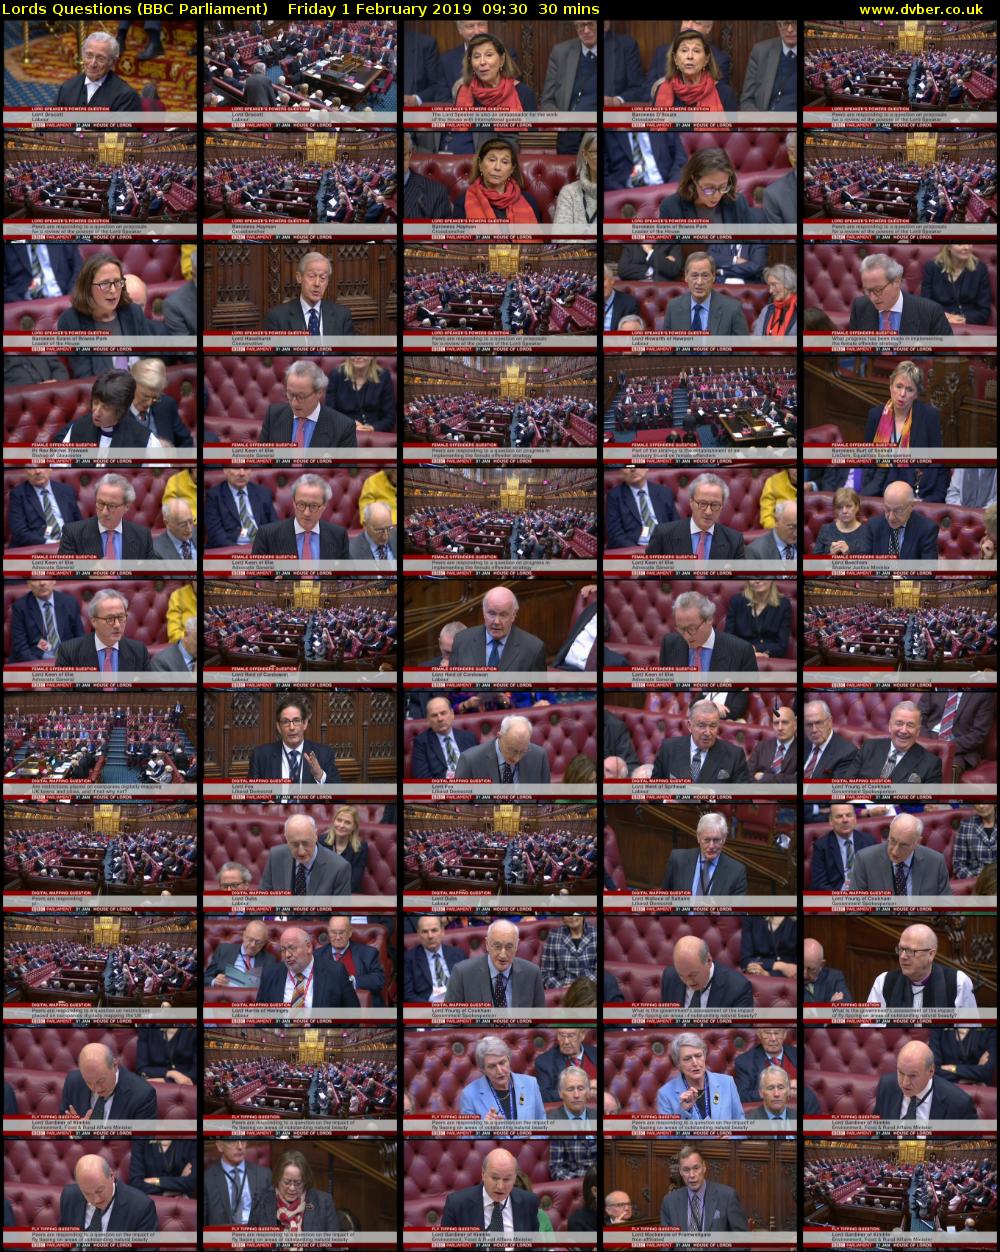 Lords Questions (BBC Parliament) Friday 1 February 2019 09:30 - 10:00